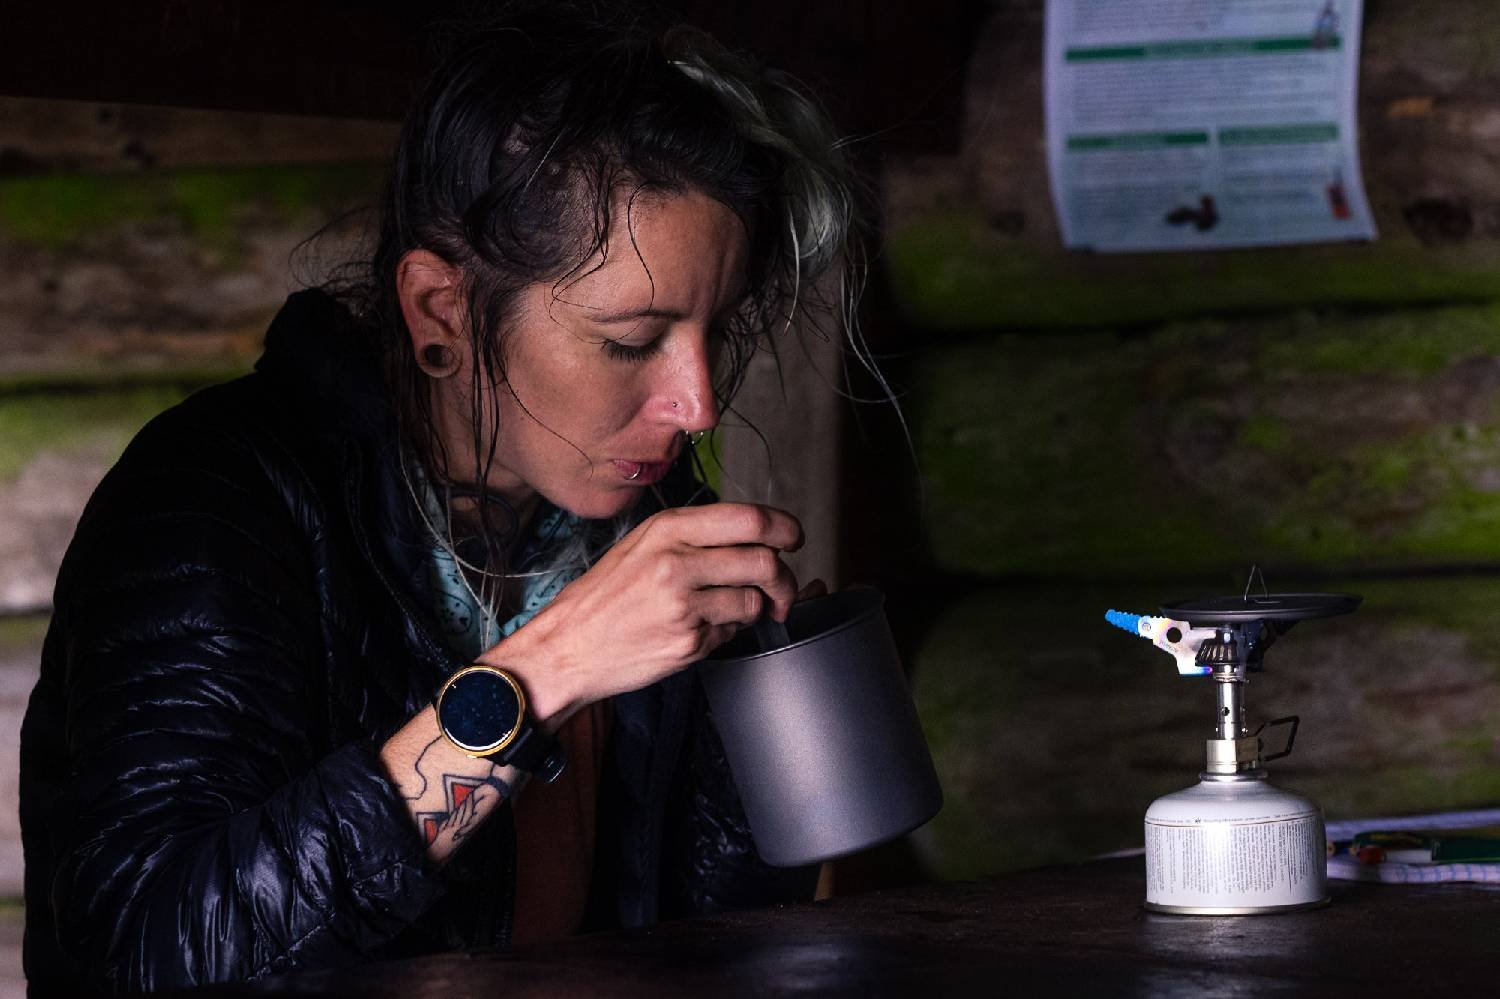 A hiker sitting in a cabin eating out of a pot - the Snow Peak Litemax stove is set up in front of them